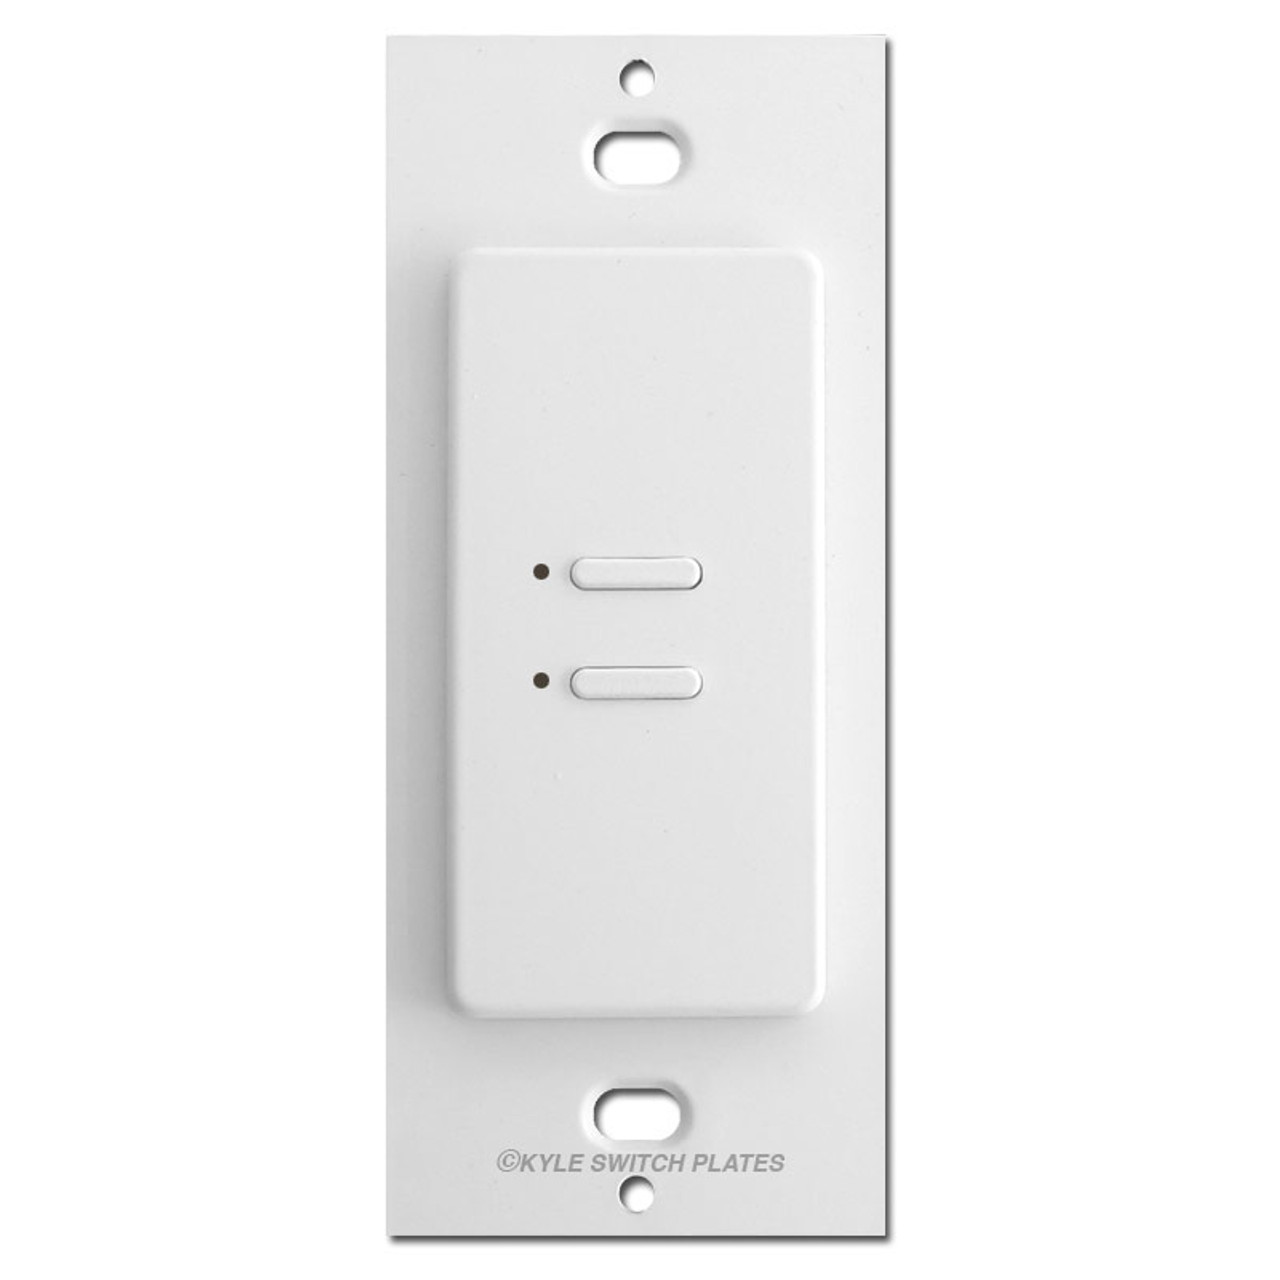 Touchplate Ultra Button LED Voltage Light Switch - White